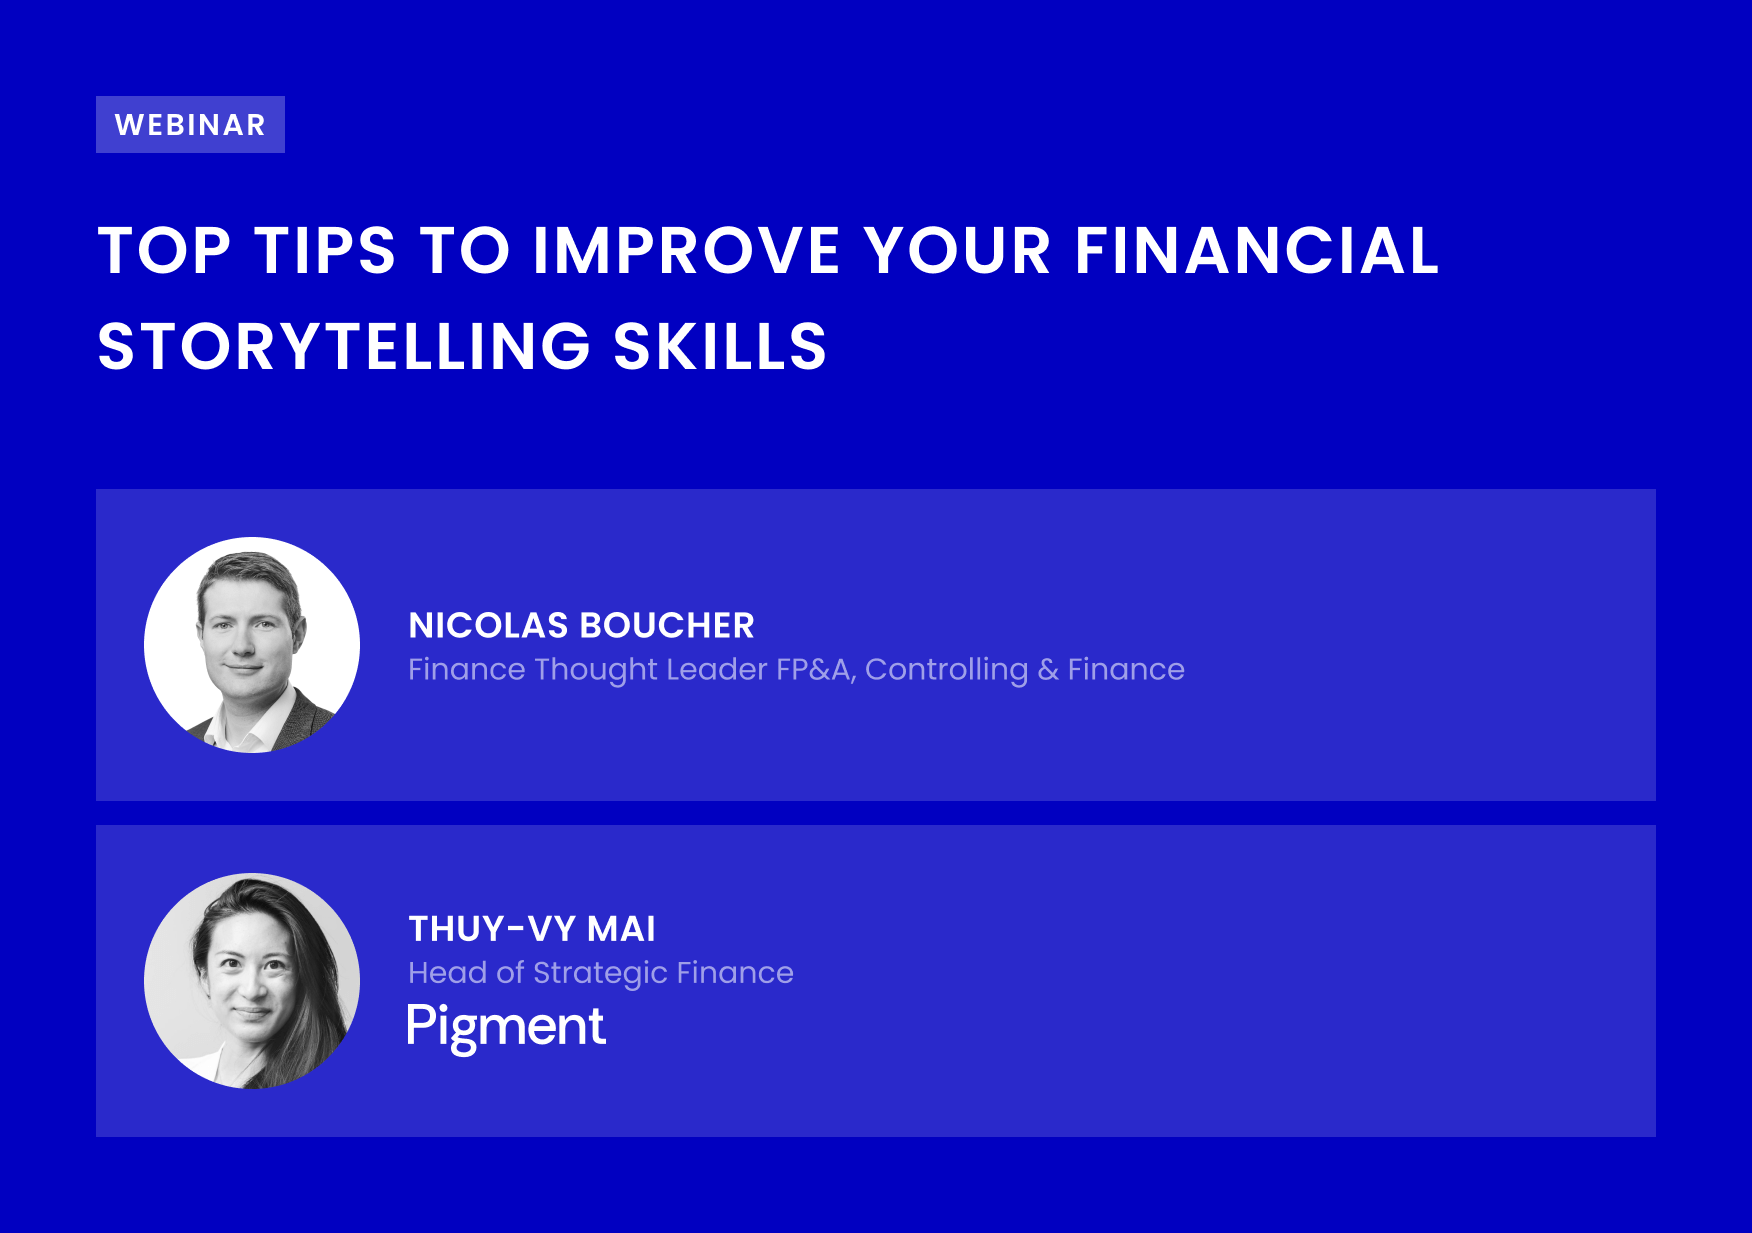 Top Tips for Financial Storytelling